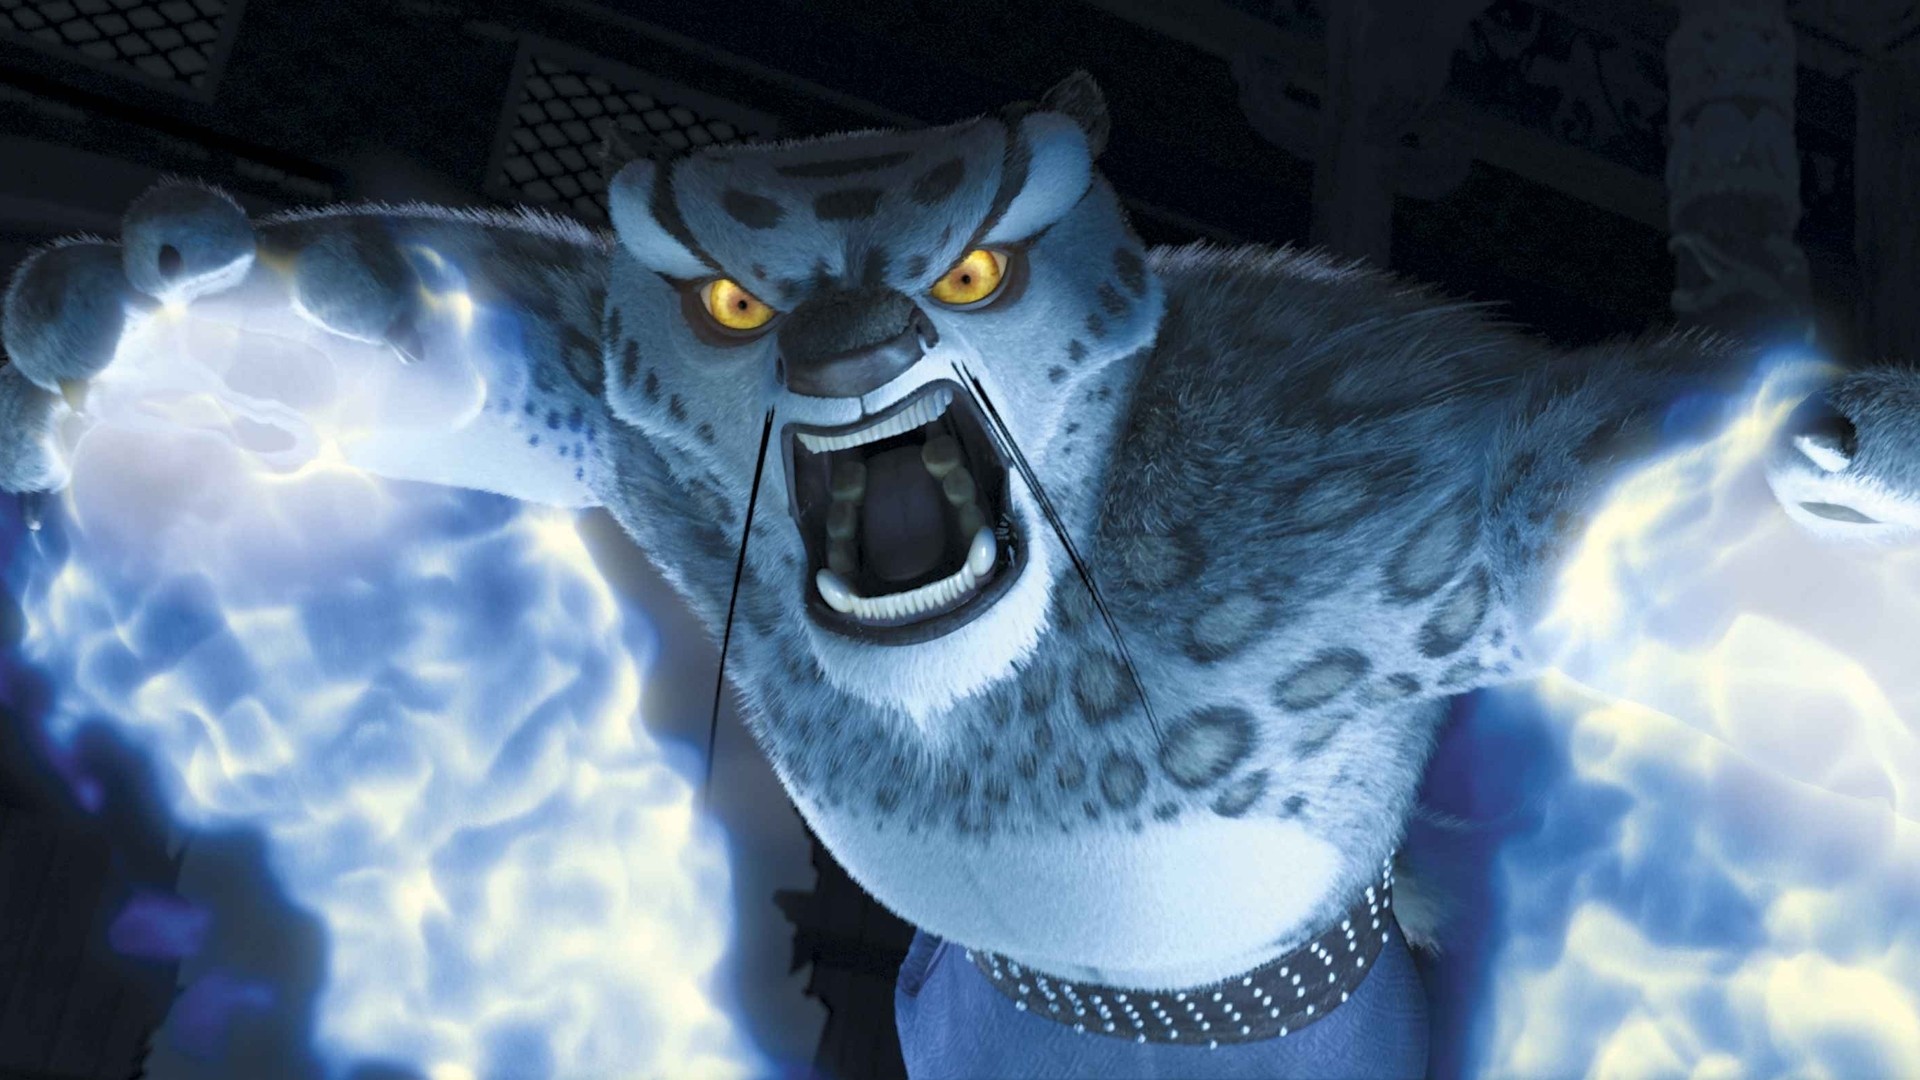 Kung Fu Panda Theory: Did Tai Lung Actually Succeed? | Techpost